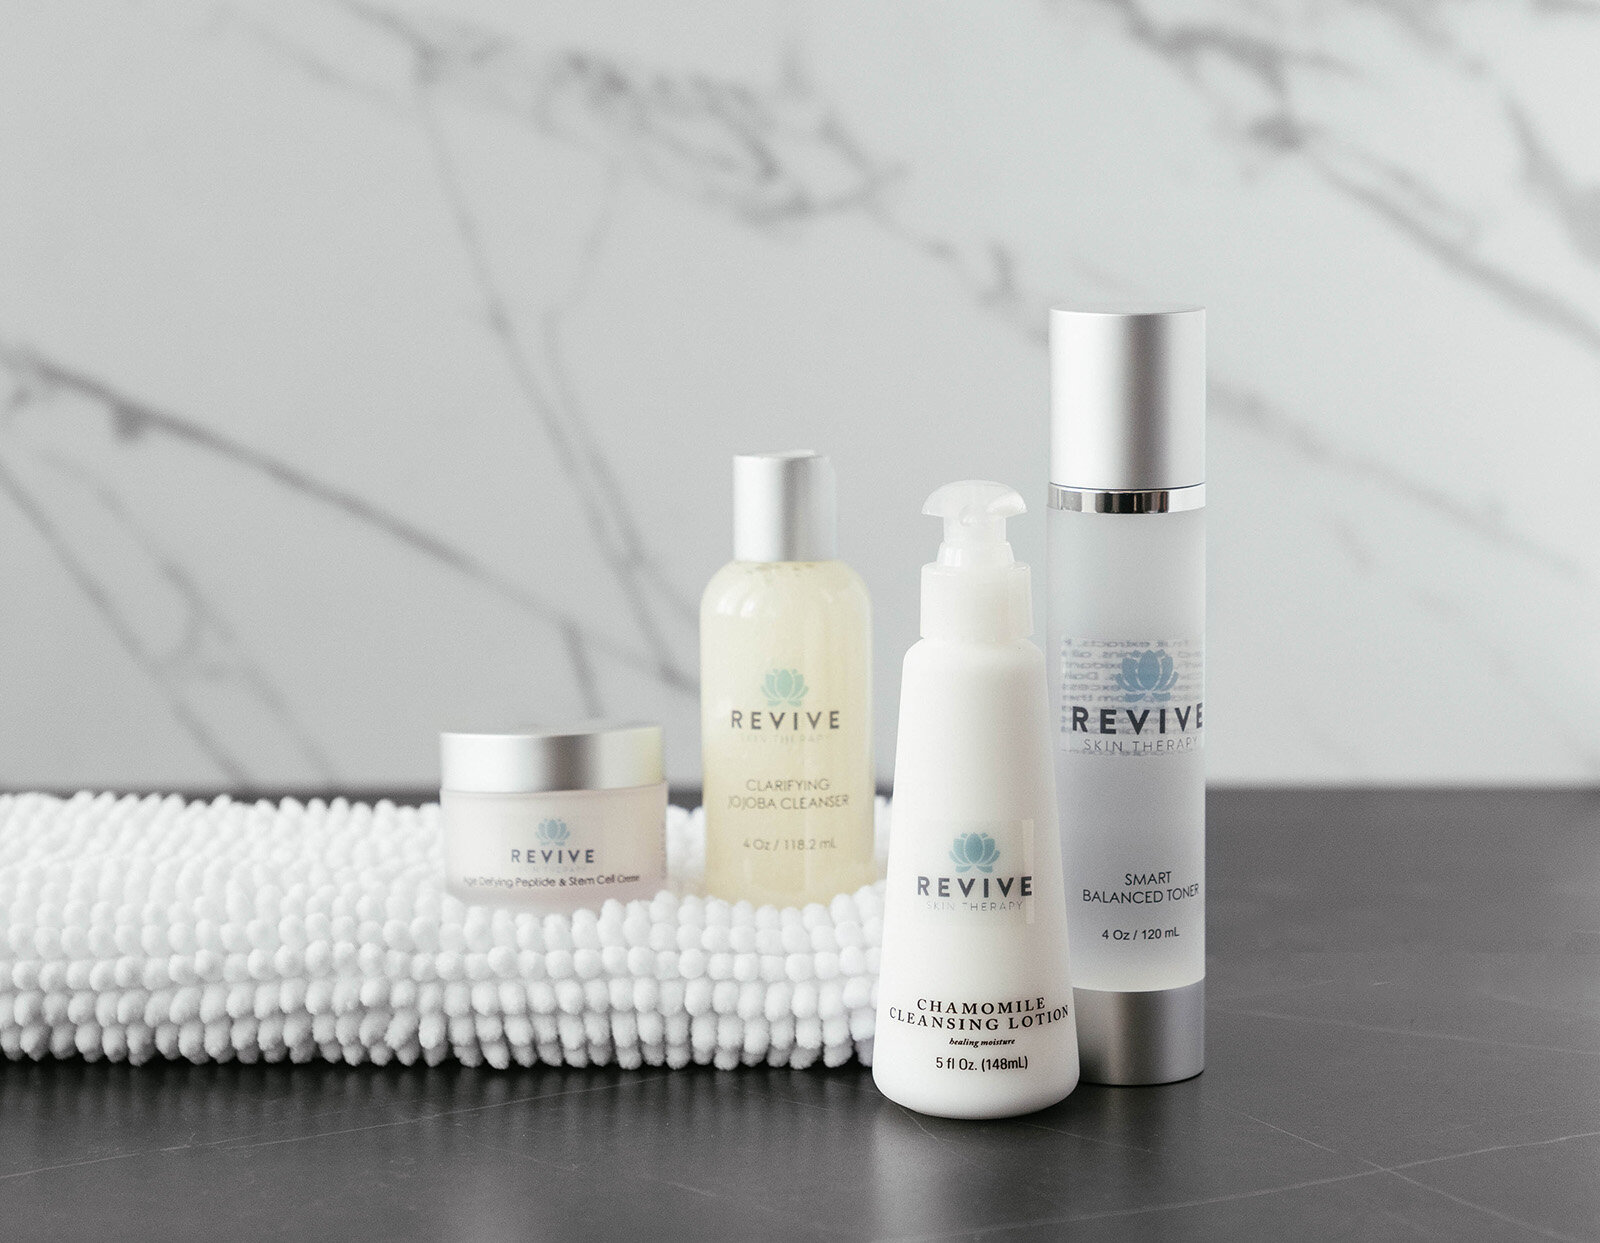 Revive Skin Therapy